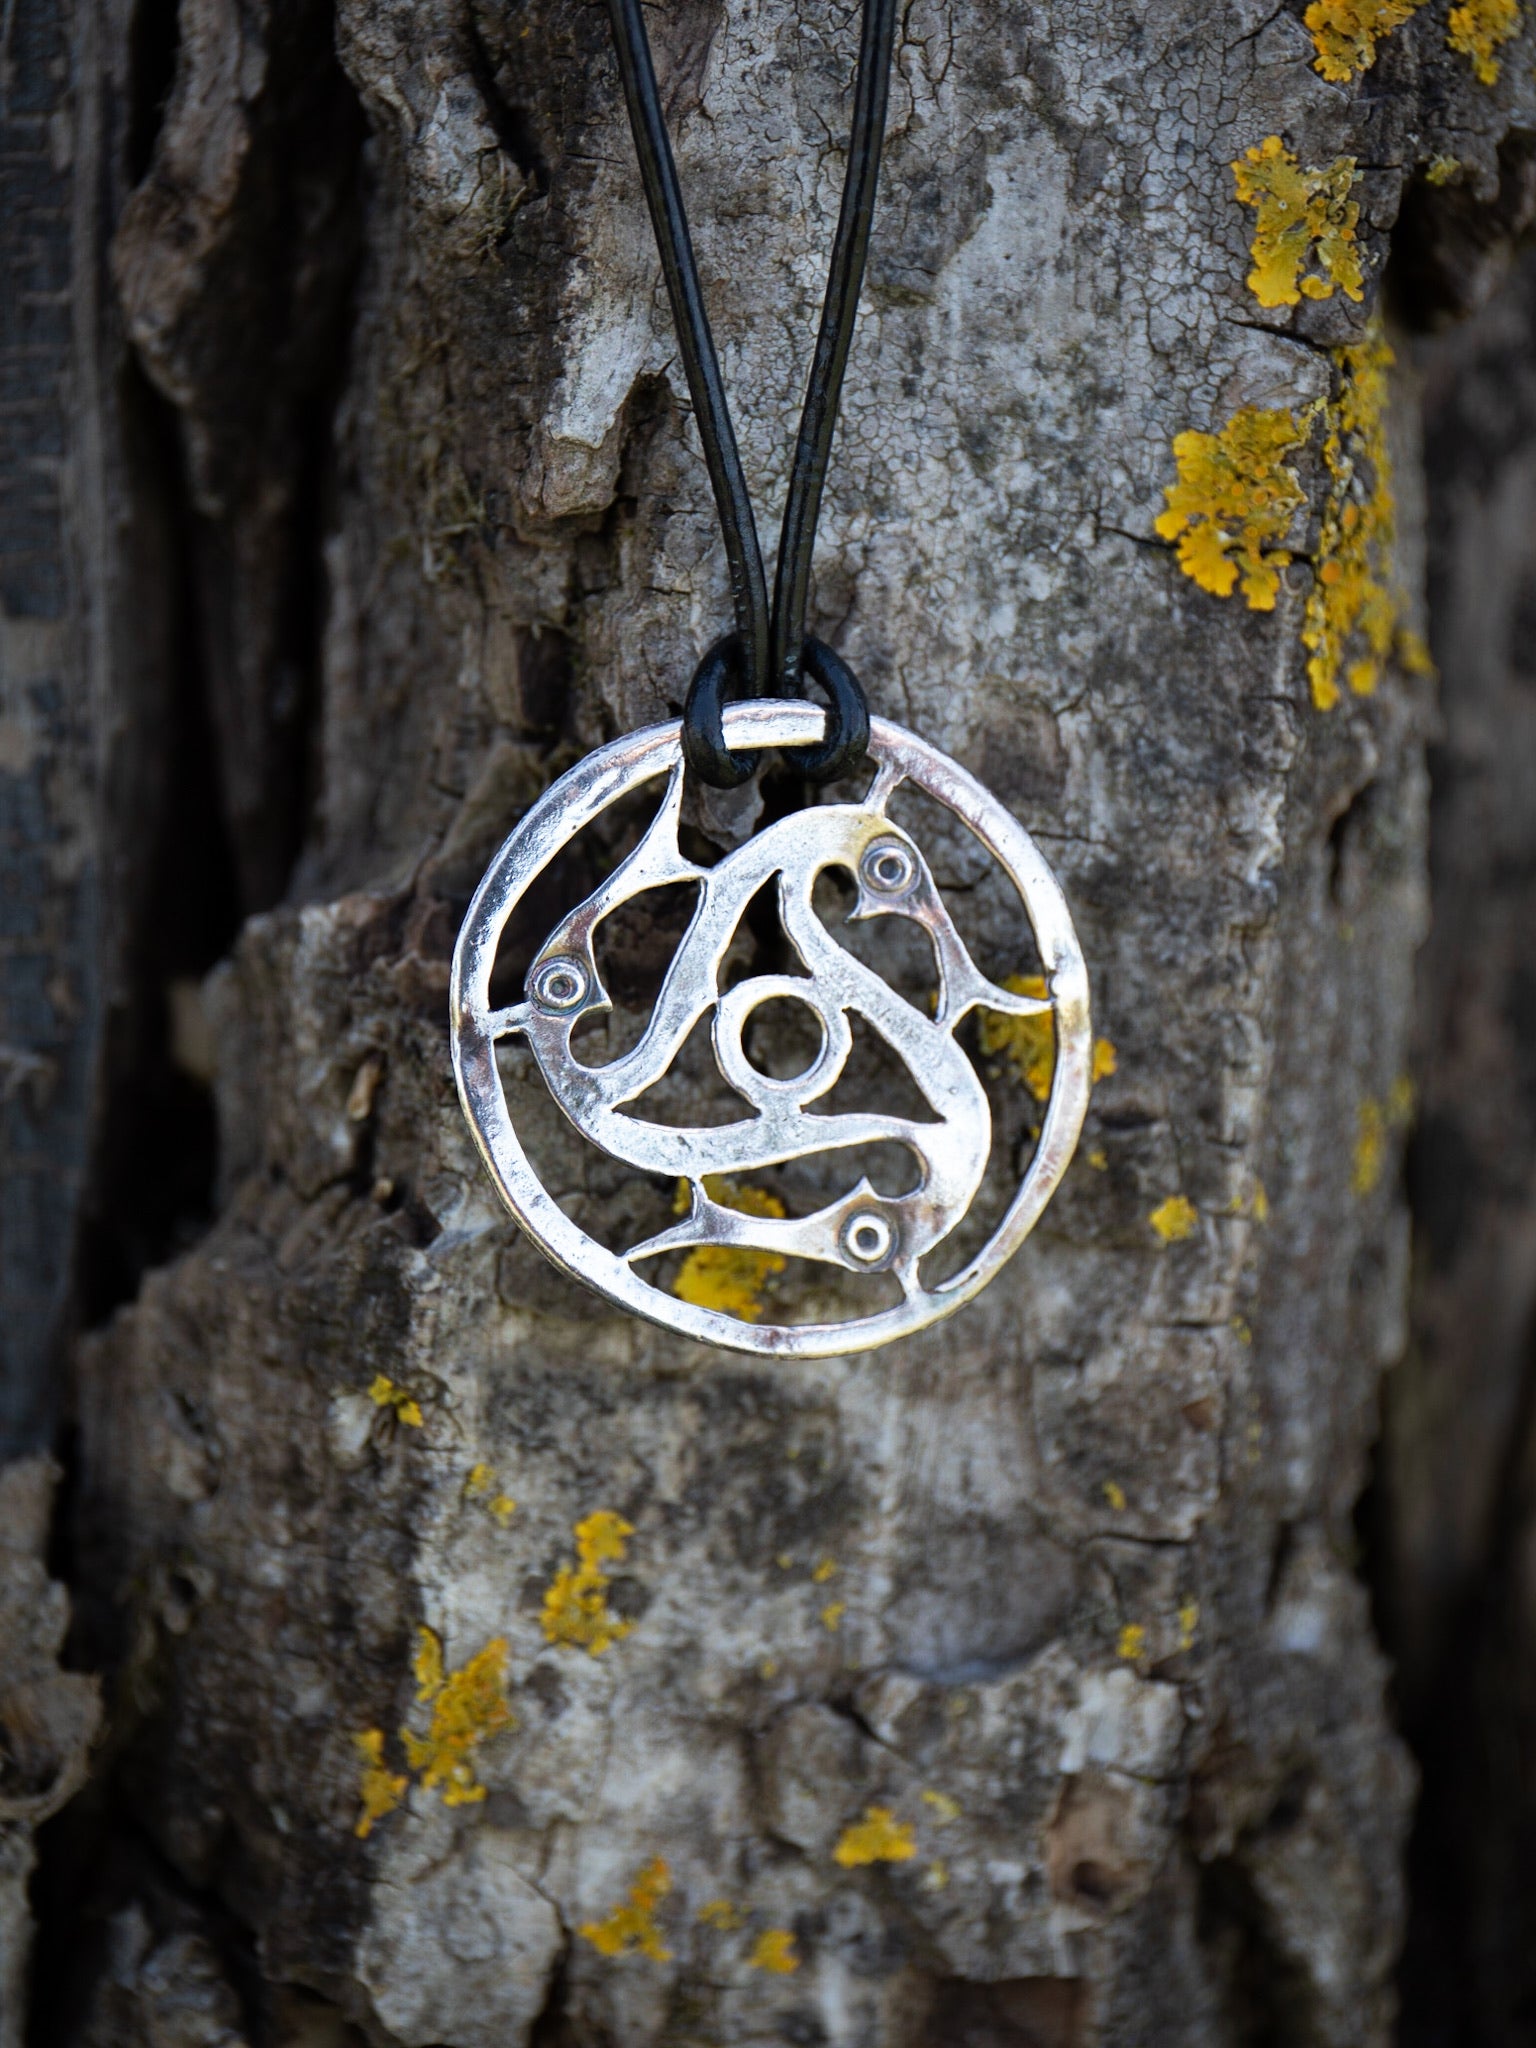 Vendel Triskelion, Descended from Odin, Wanderers Warriors,Organic T-shirts, Staithes Hoodie, Merino Wool Hoodie, Odin, TYR, Thor, Ragnar, Bjorn Ironside, Vikings, Anglo Saxon, Norse, Fitness Gear, Horns, Jewellery, Silver